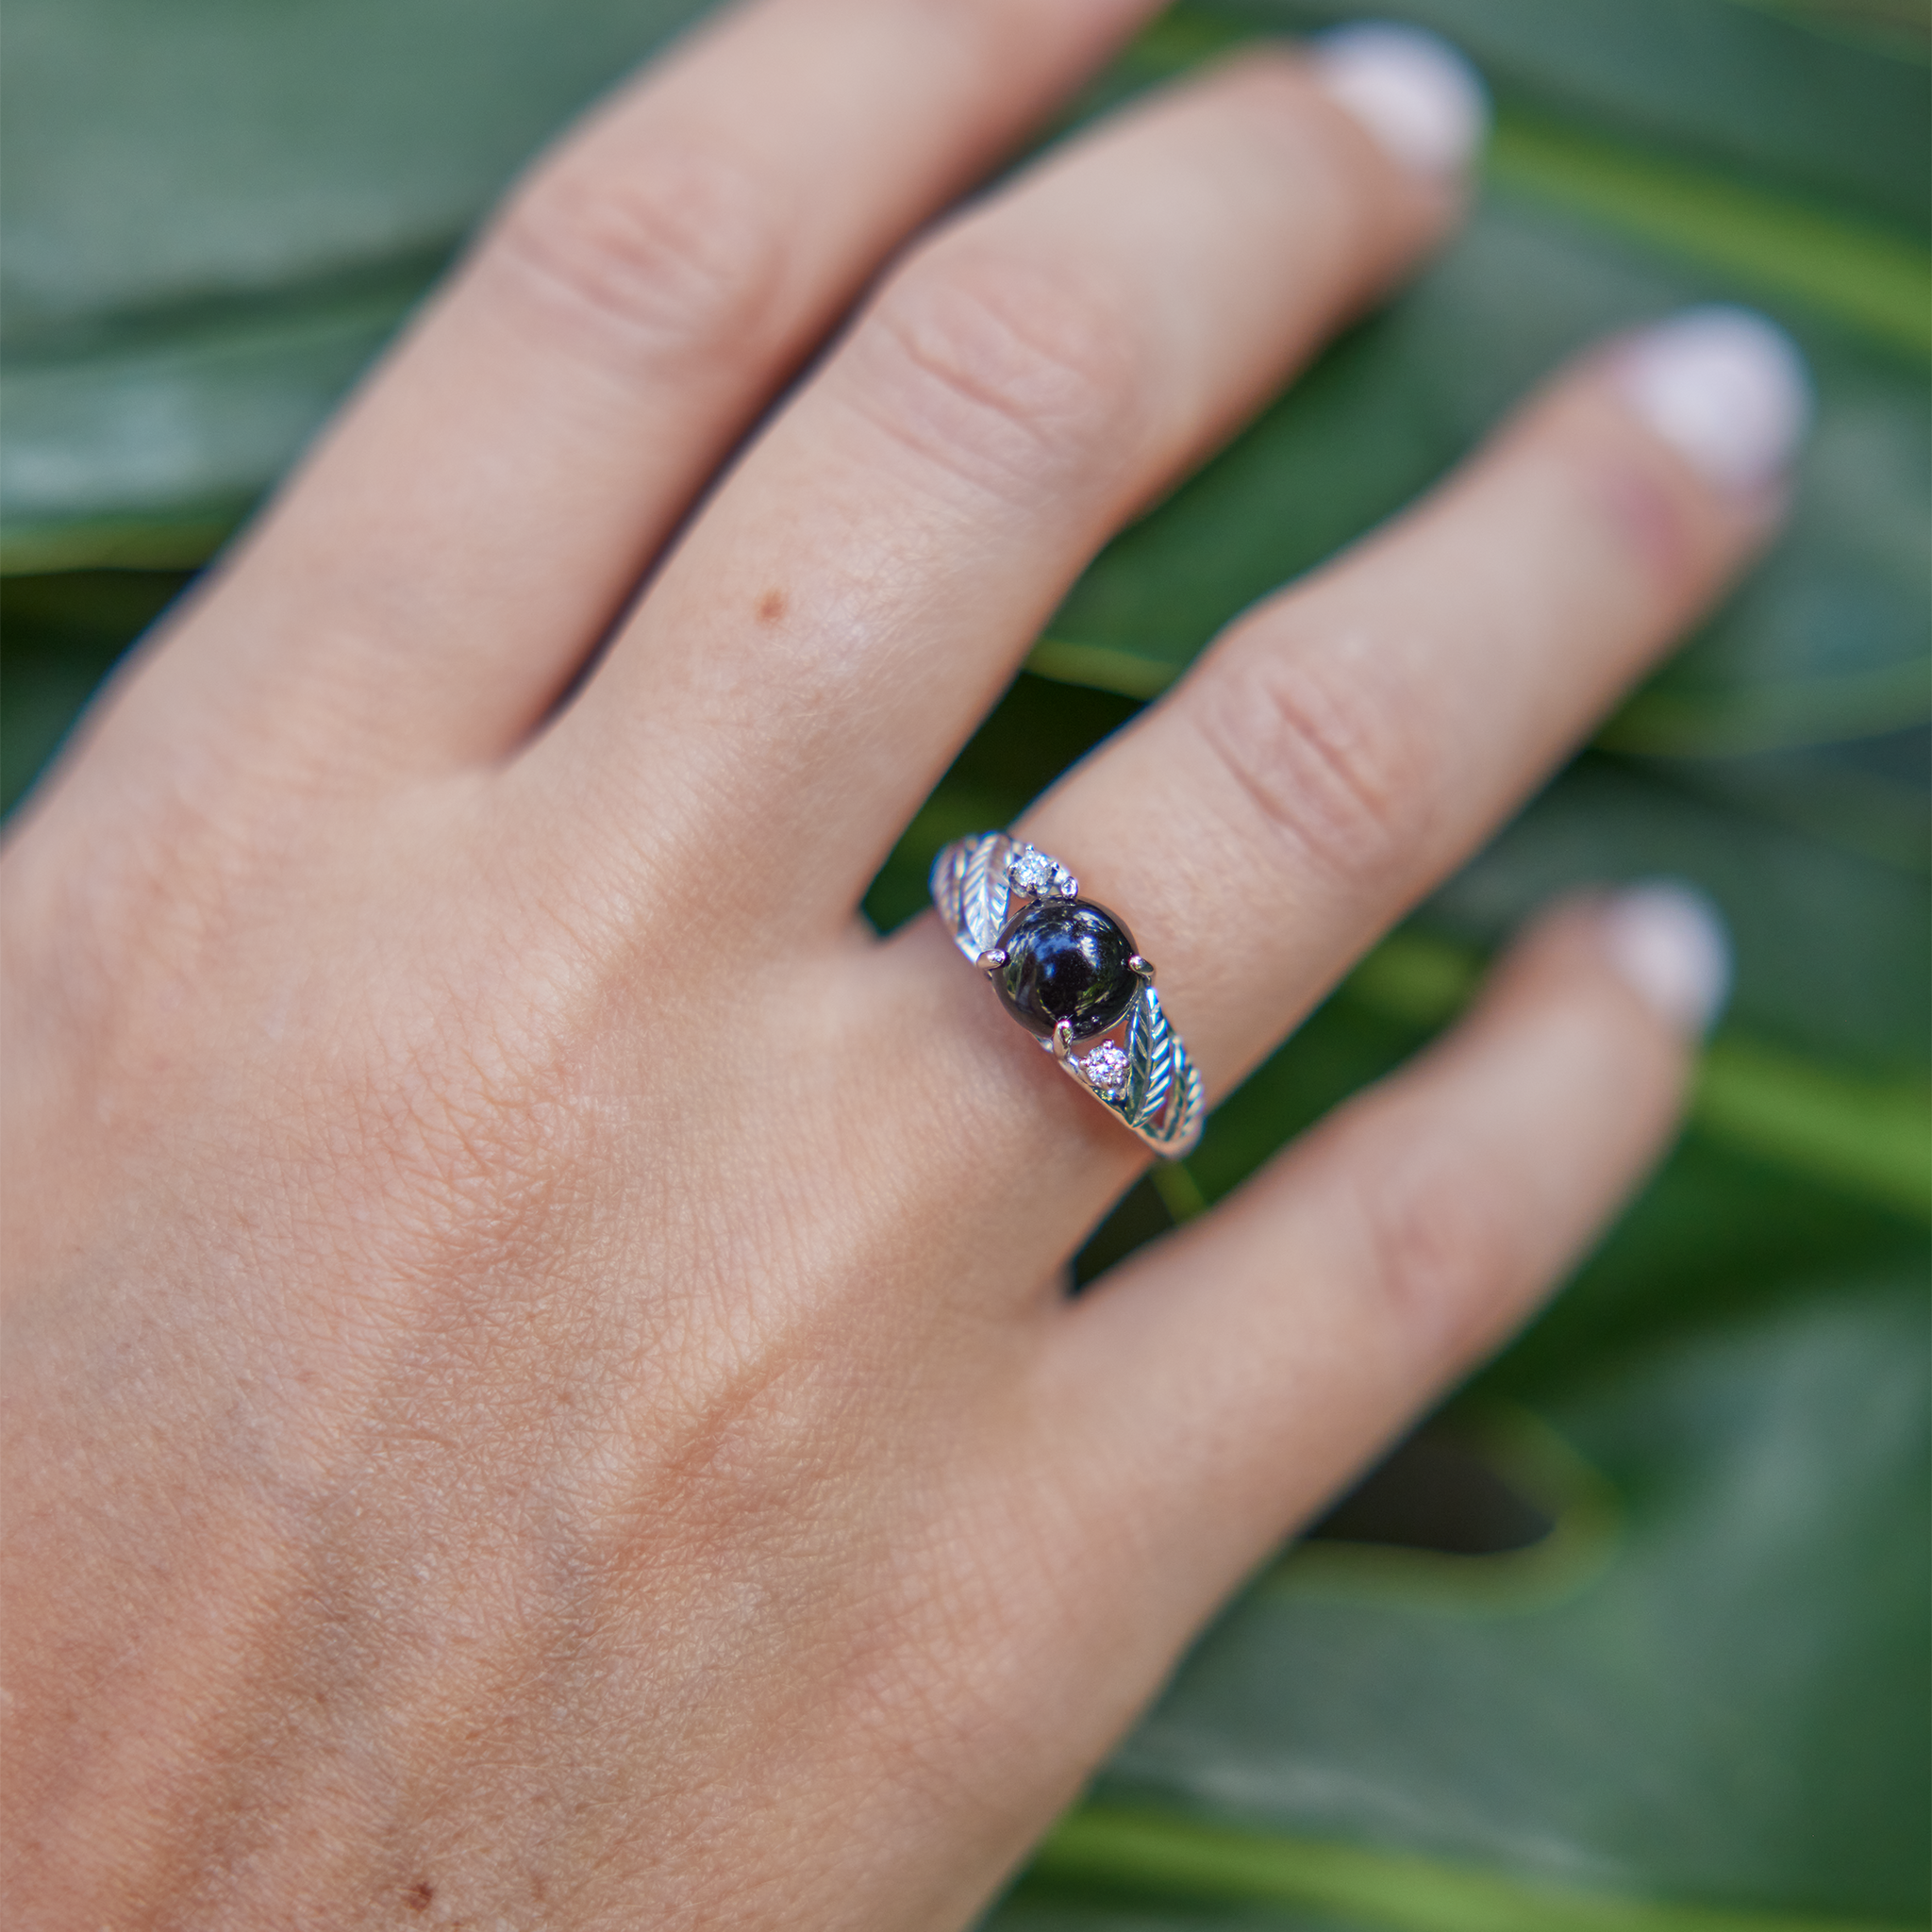 Womanʻs hand wearing Maile Black Coral Ring in White Gold with Diamonds with monstera in the background